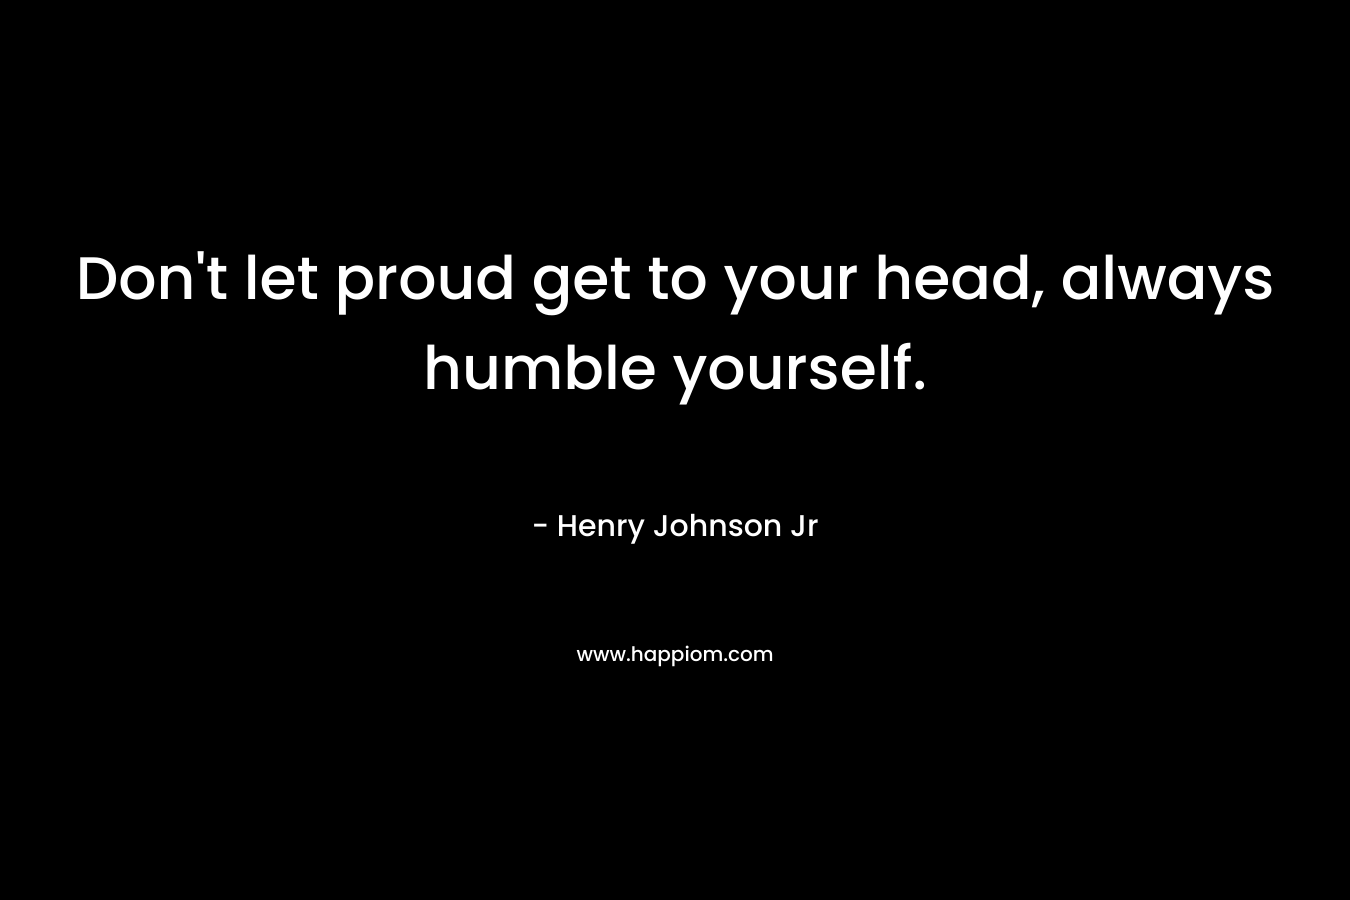 Don't let proud get to your head, always humble yourself.